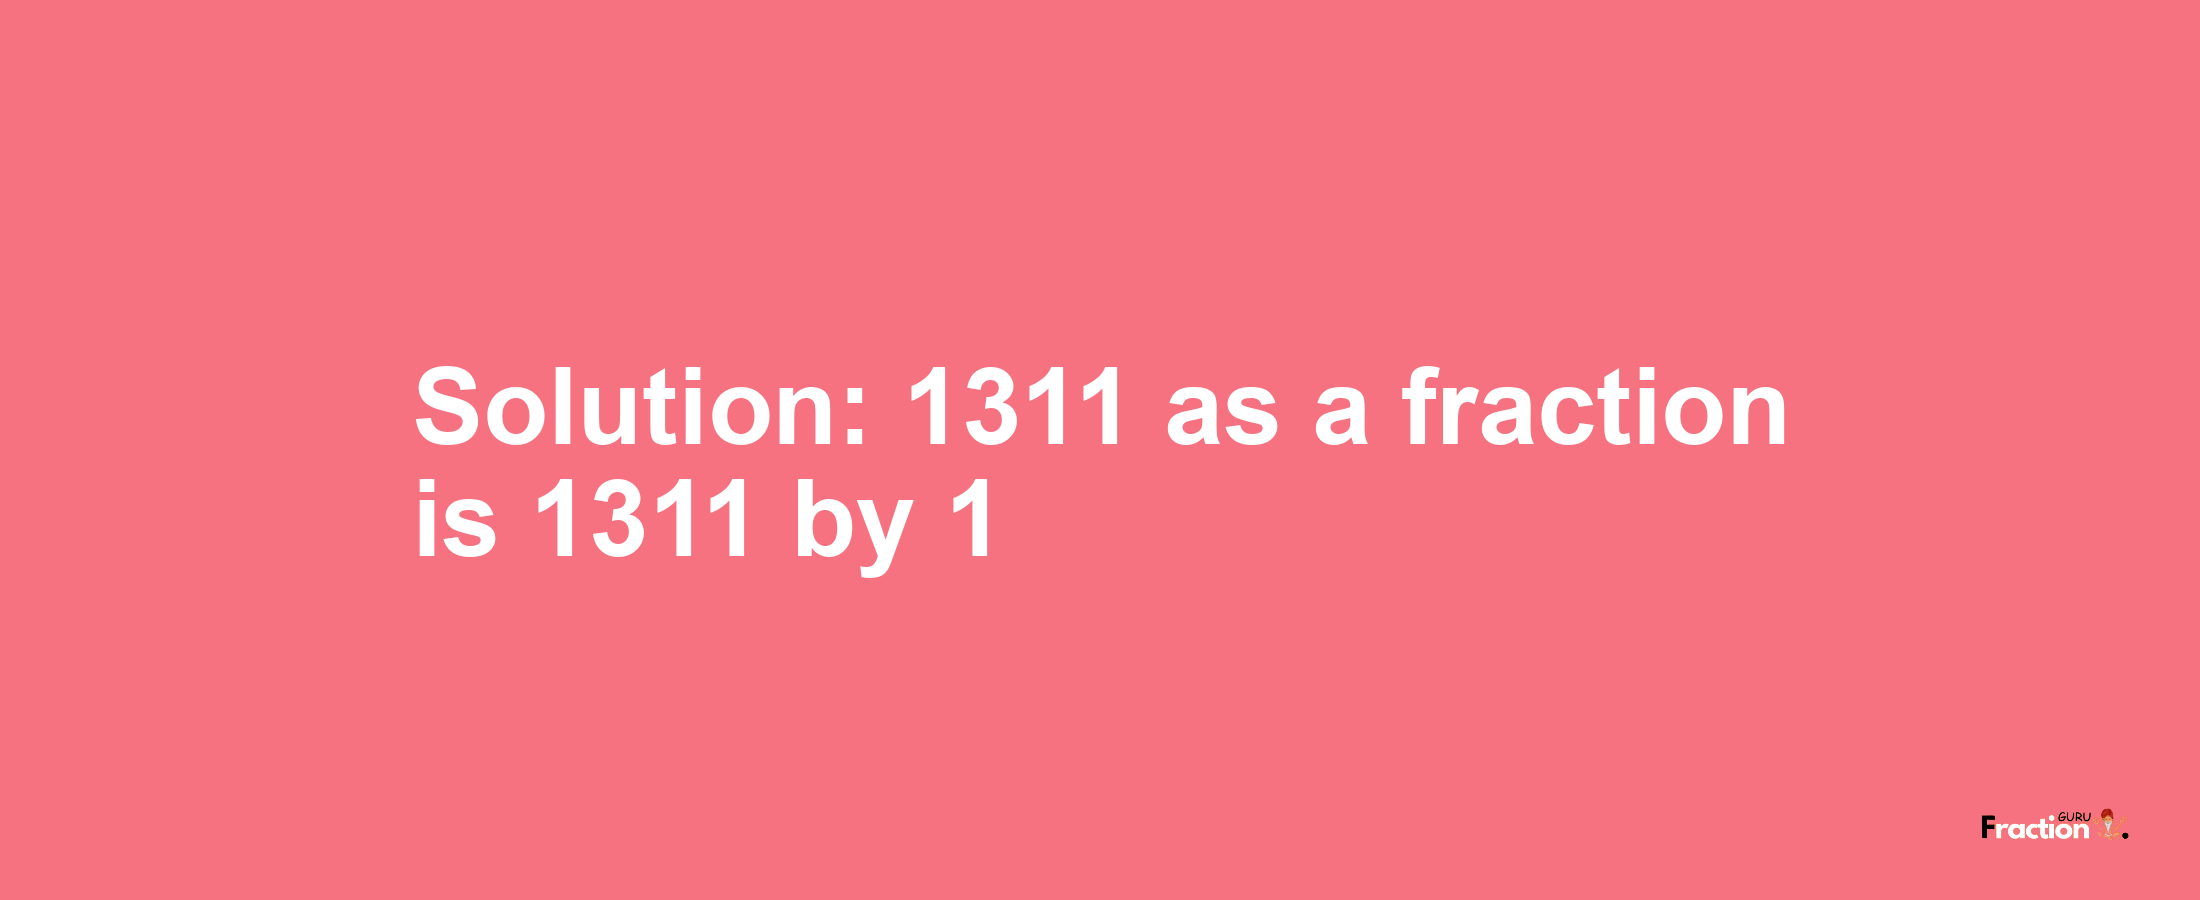 Solution:1311 as a fraction is 1311/1